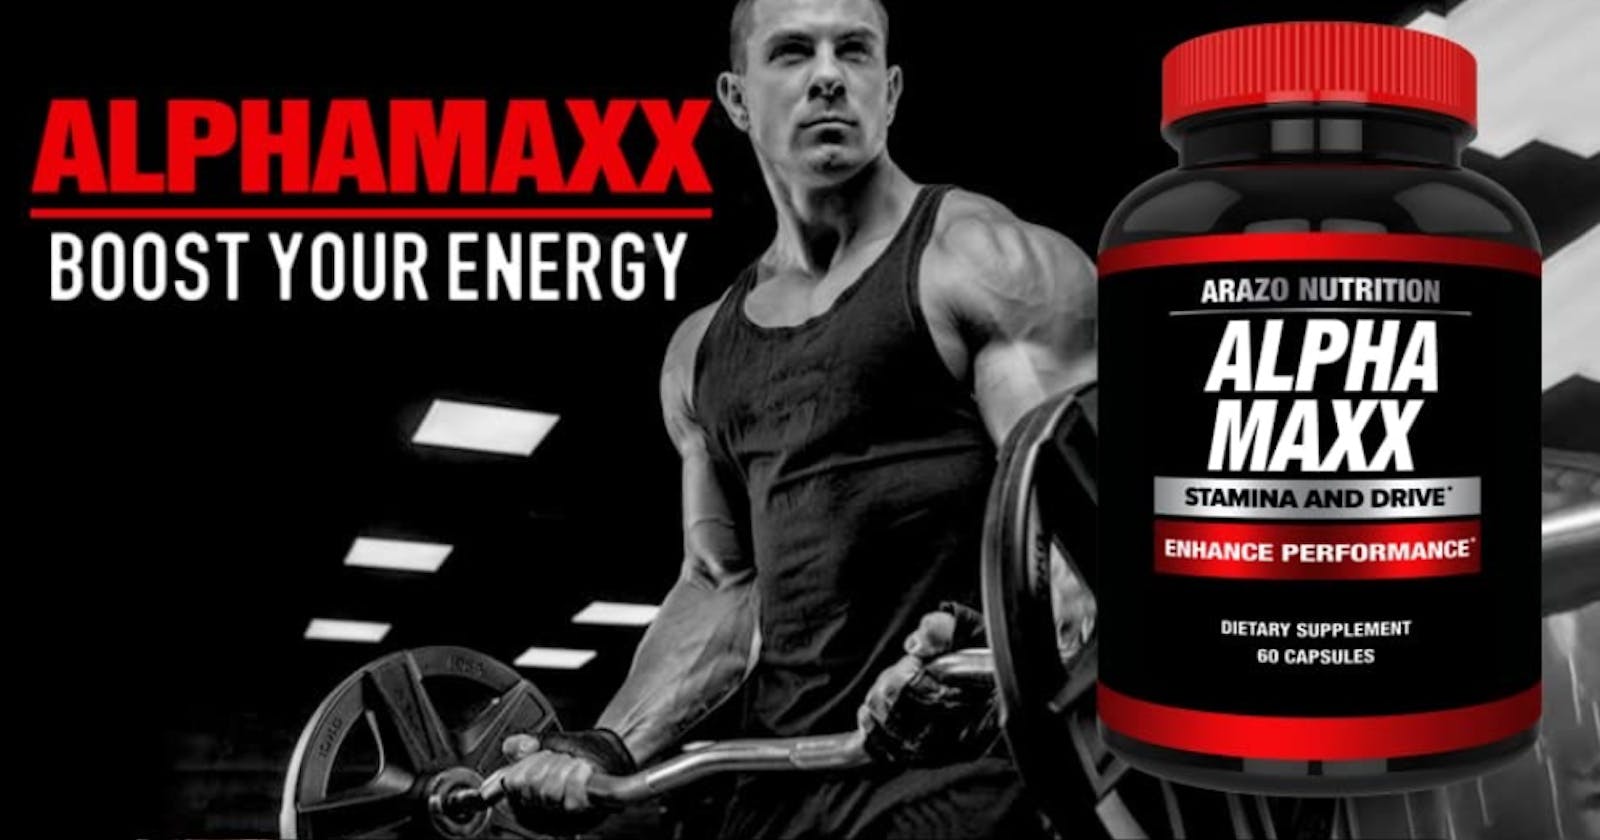 Unlock Your Potential with Alpha Max Male Enhancement: The Ultimate Performance!